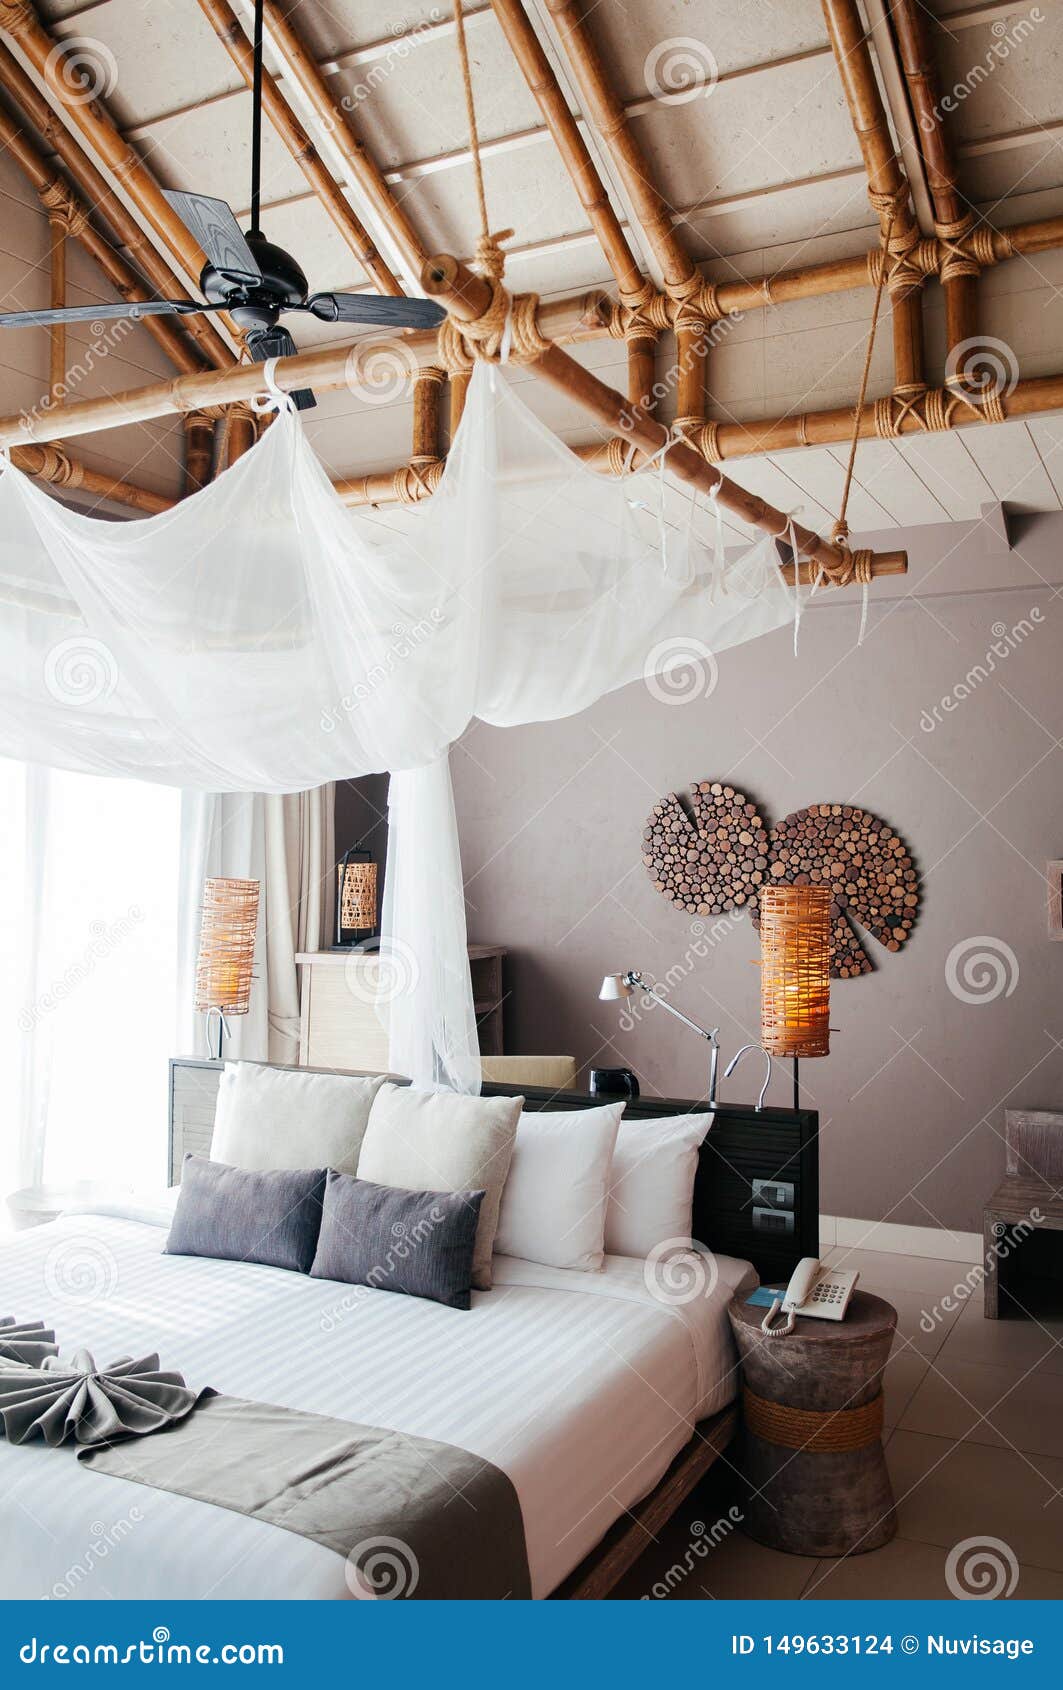 Asian Thai Tropical Luxury Resort Room With Wooden Bed And White